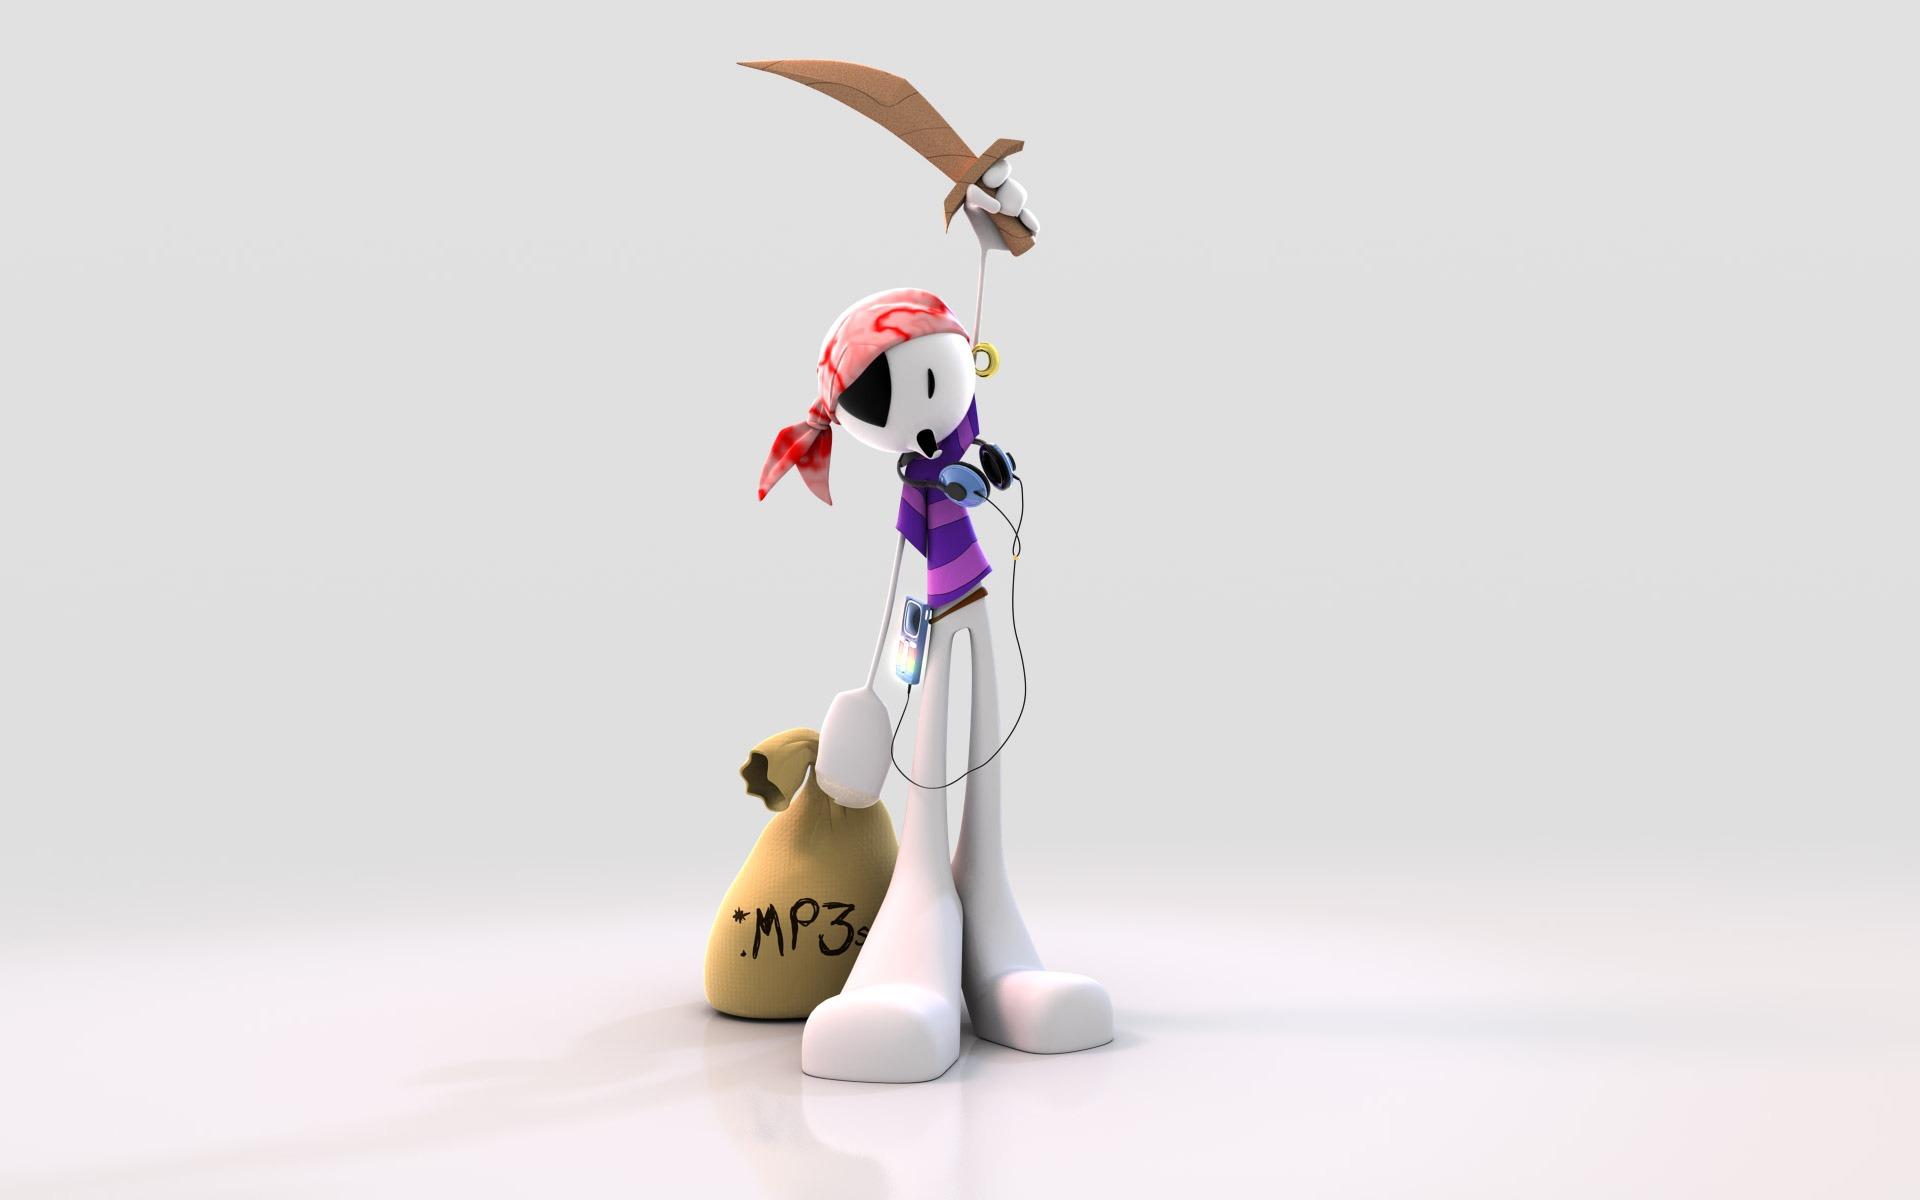 Music Pirate Wallpaper 3D Characters 3D Wallpaper in jpg format for free download